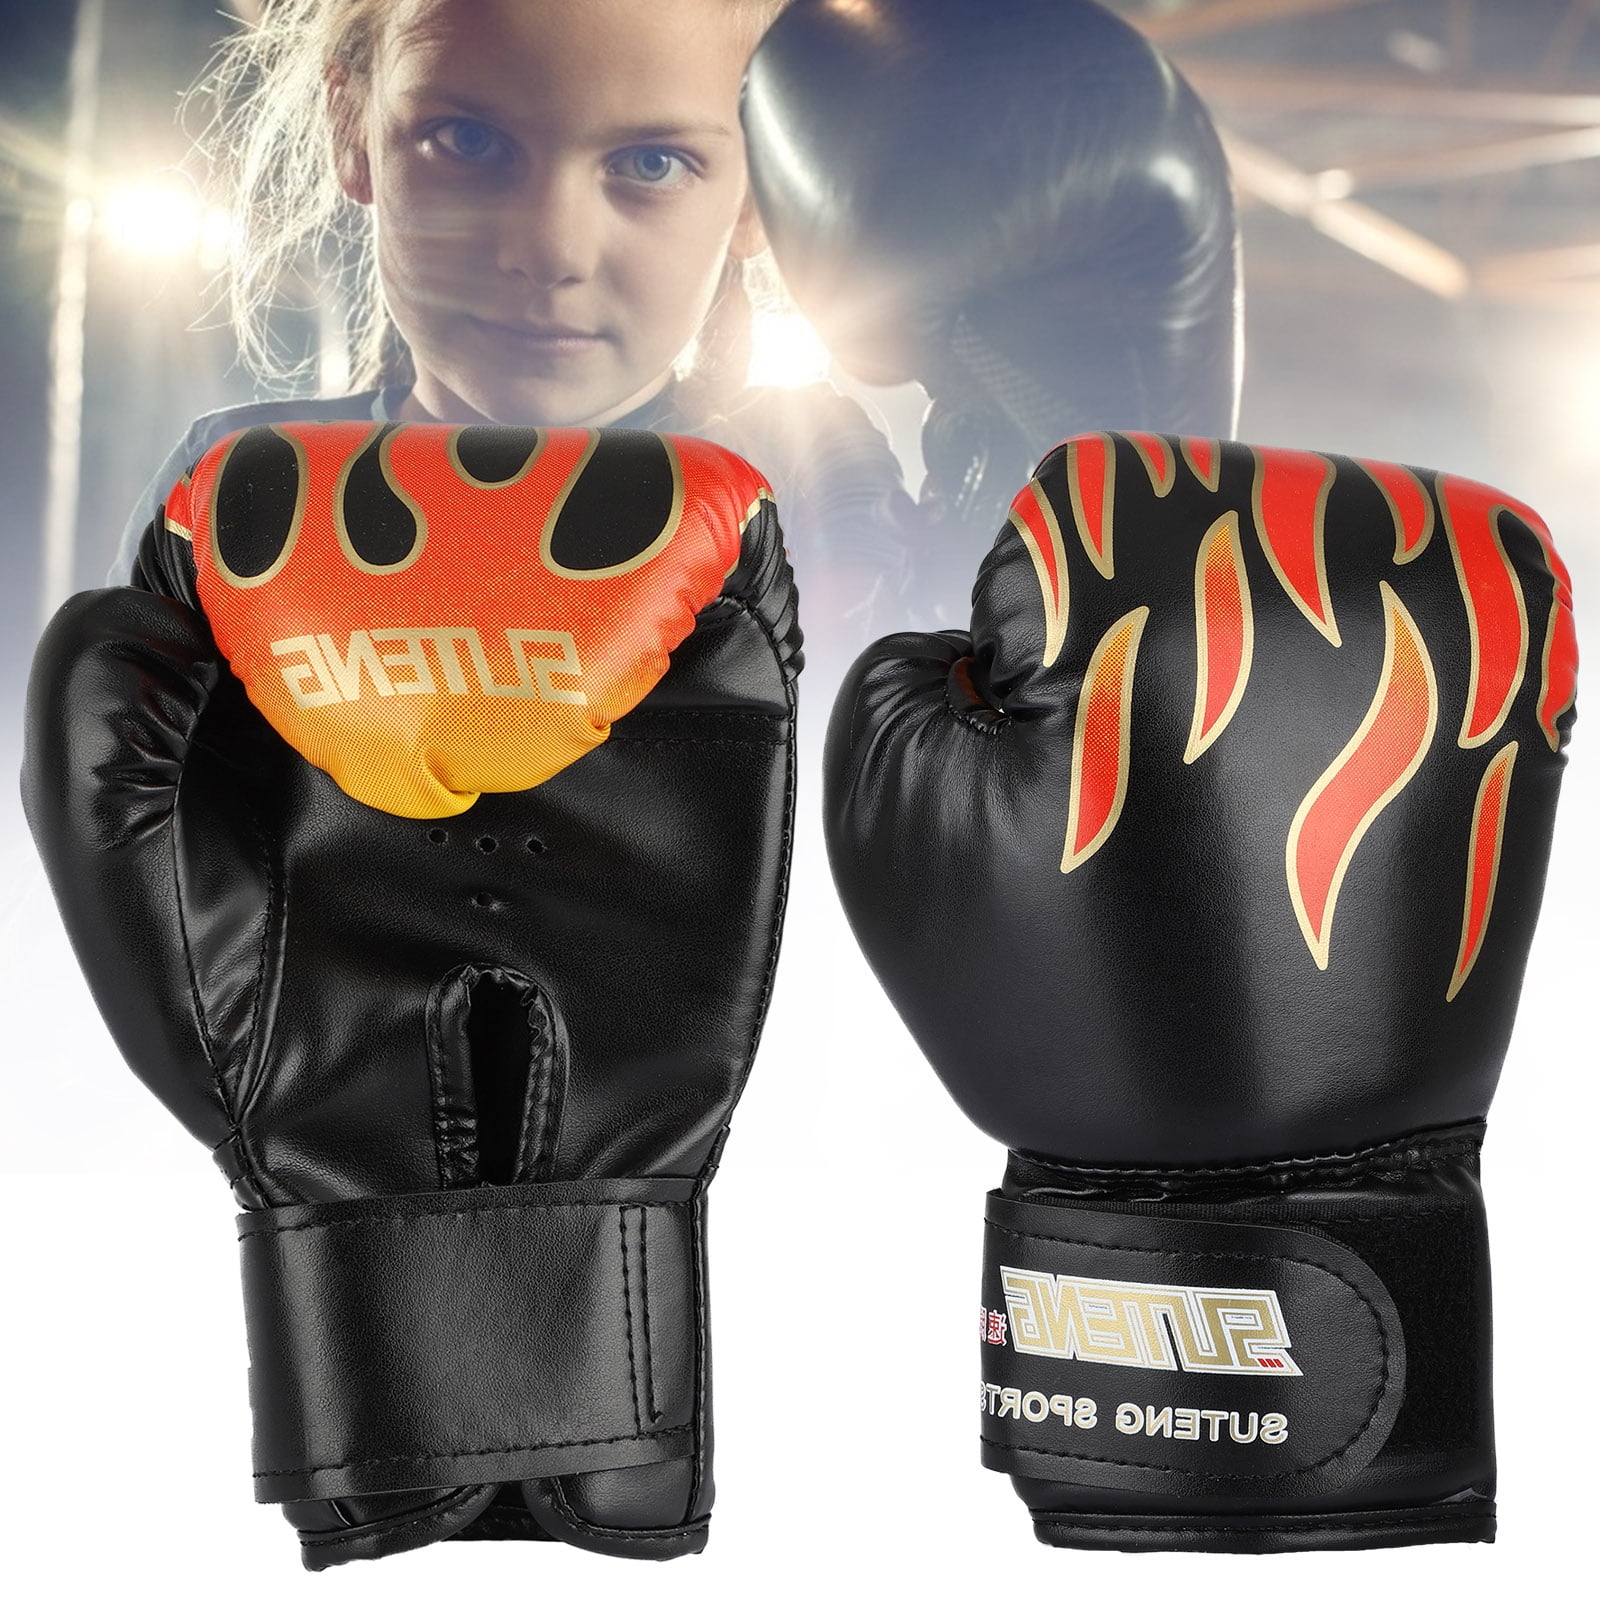 NEW Kids Boxing Gloves Punch Bag Mitts Sparring Glove Children Training 2 to 8oz 